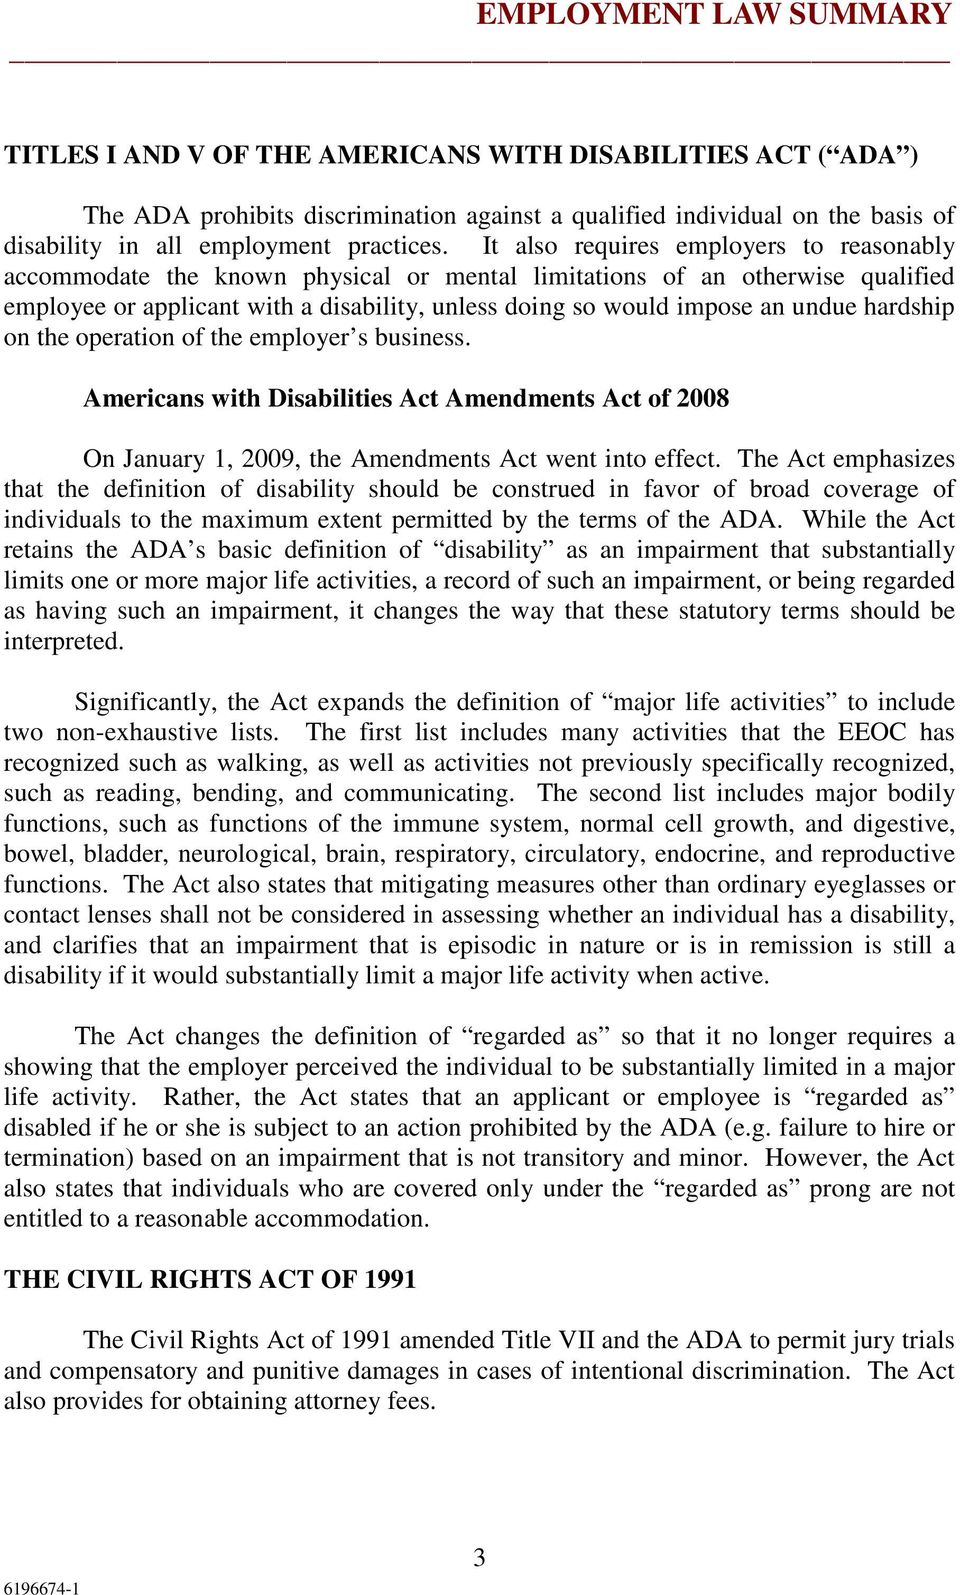 hardship on the operation of the employer s business. Americans with Disabilities Act Amendments Act of 2008 On January 1, 2009, the Amendments Act went into effect.